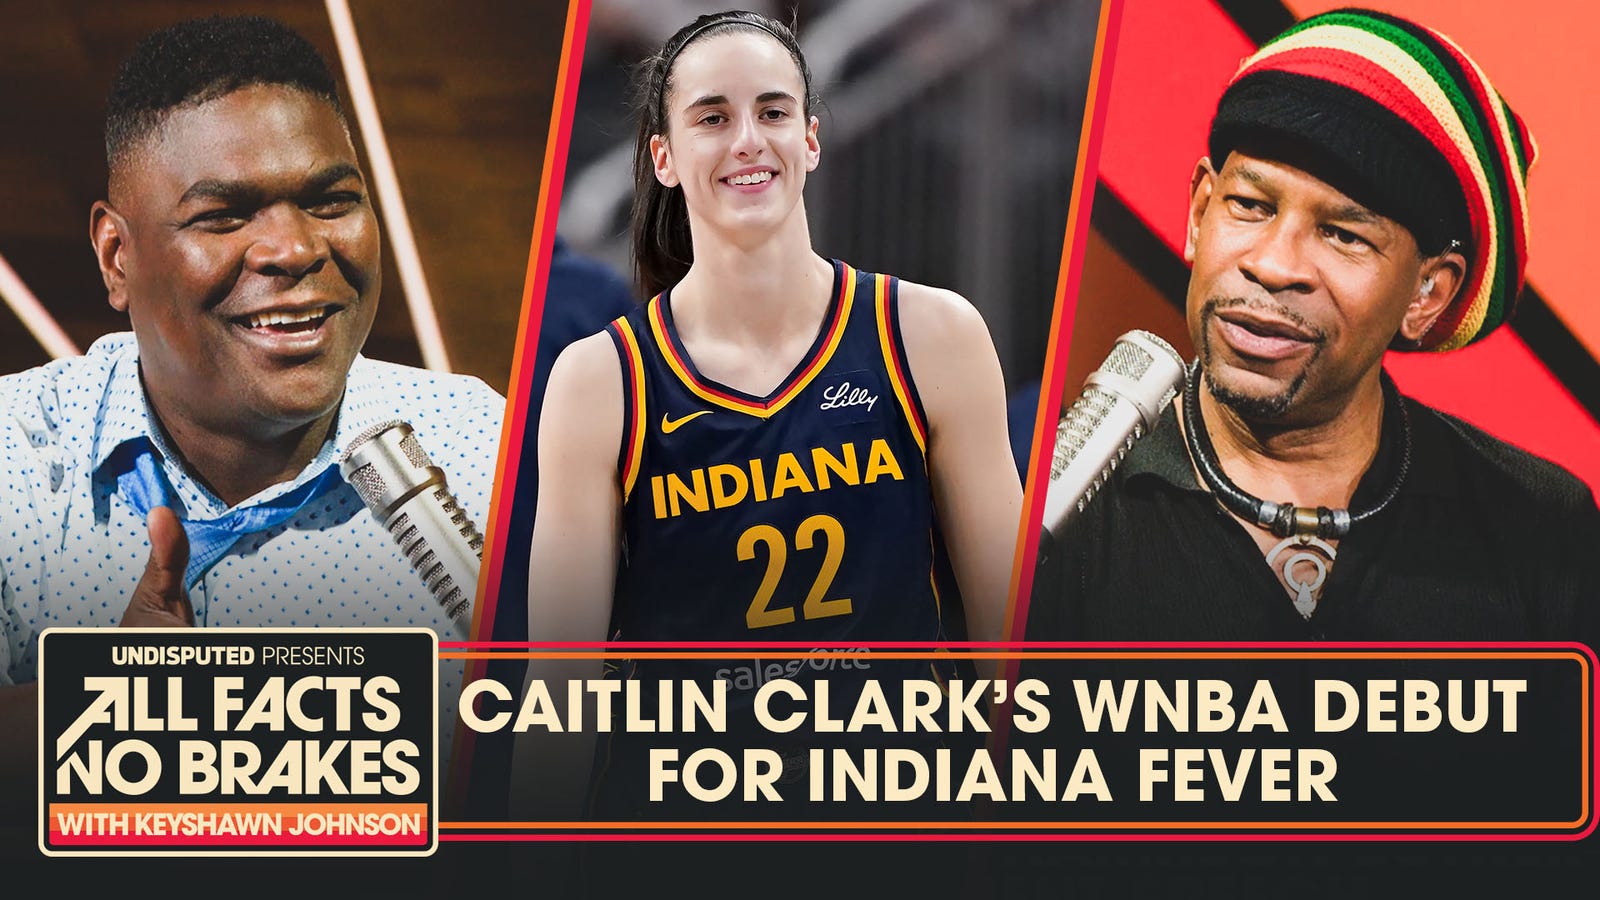 Caitlin Clark disappointing in WNBA debut for Indiana Fever? 